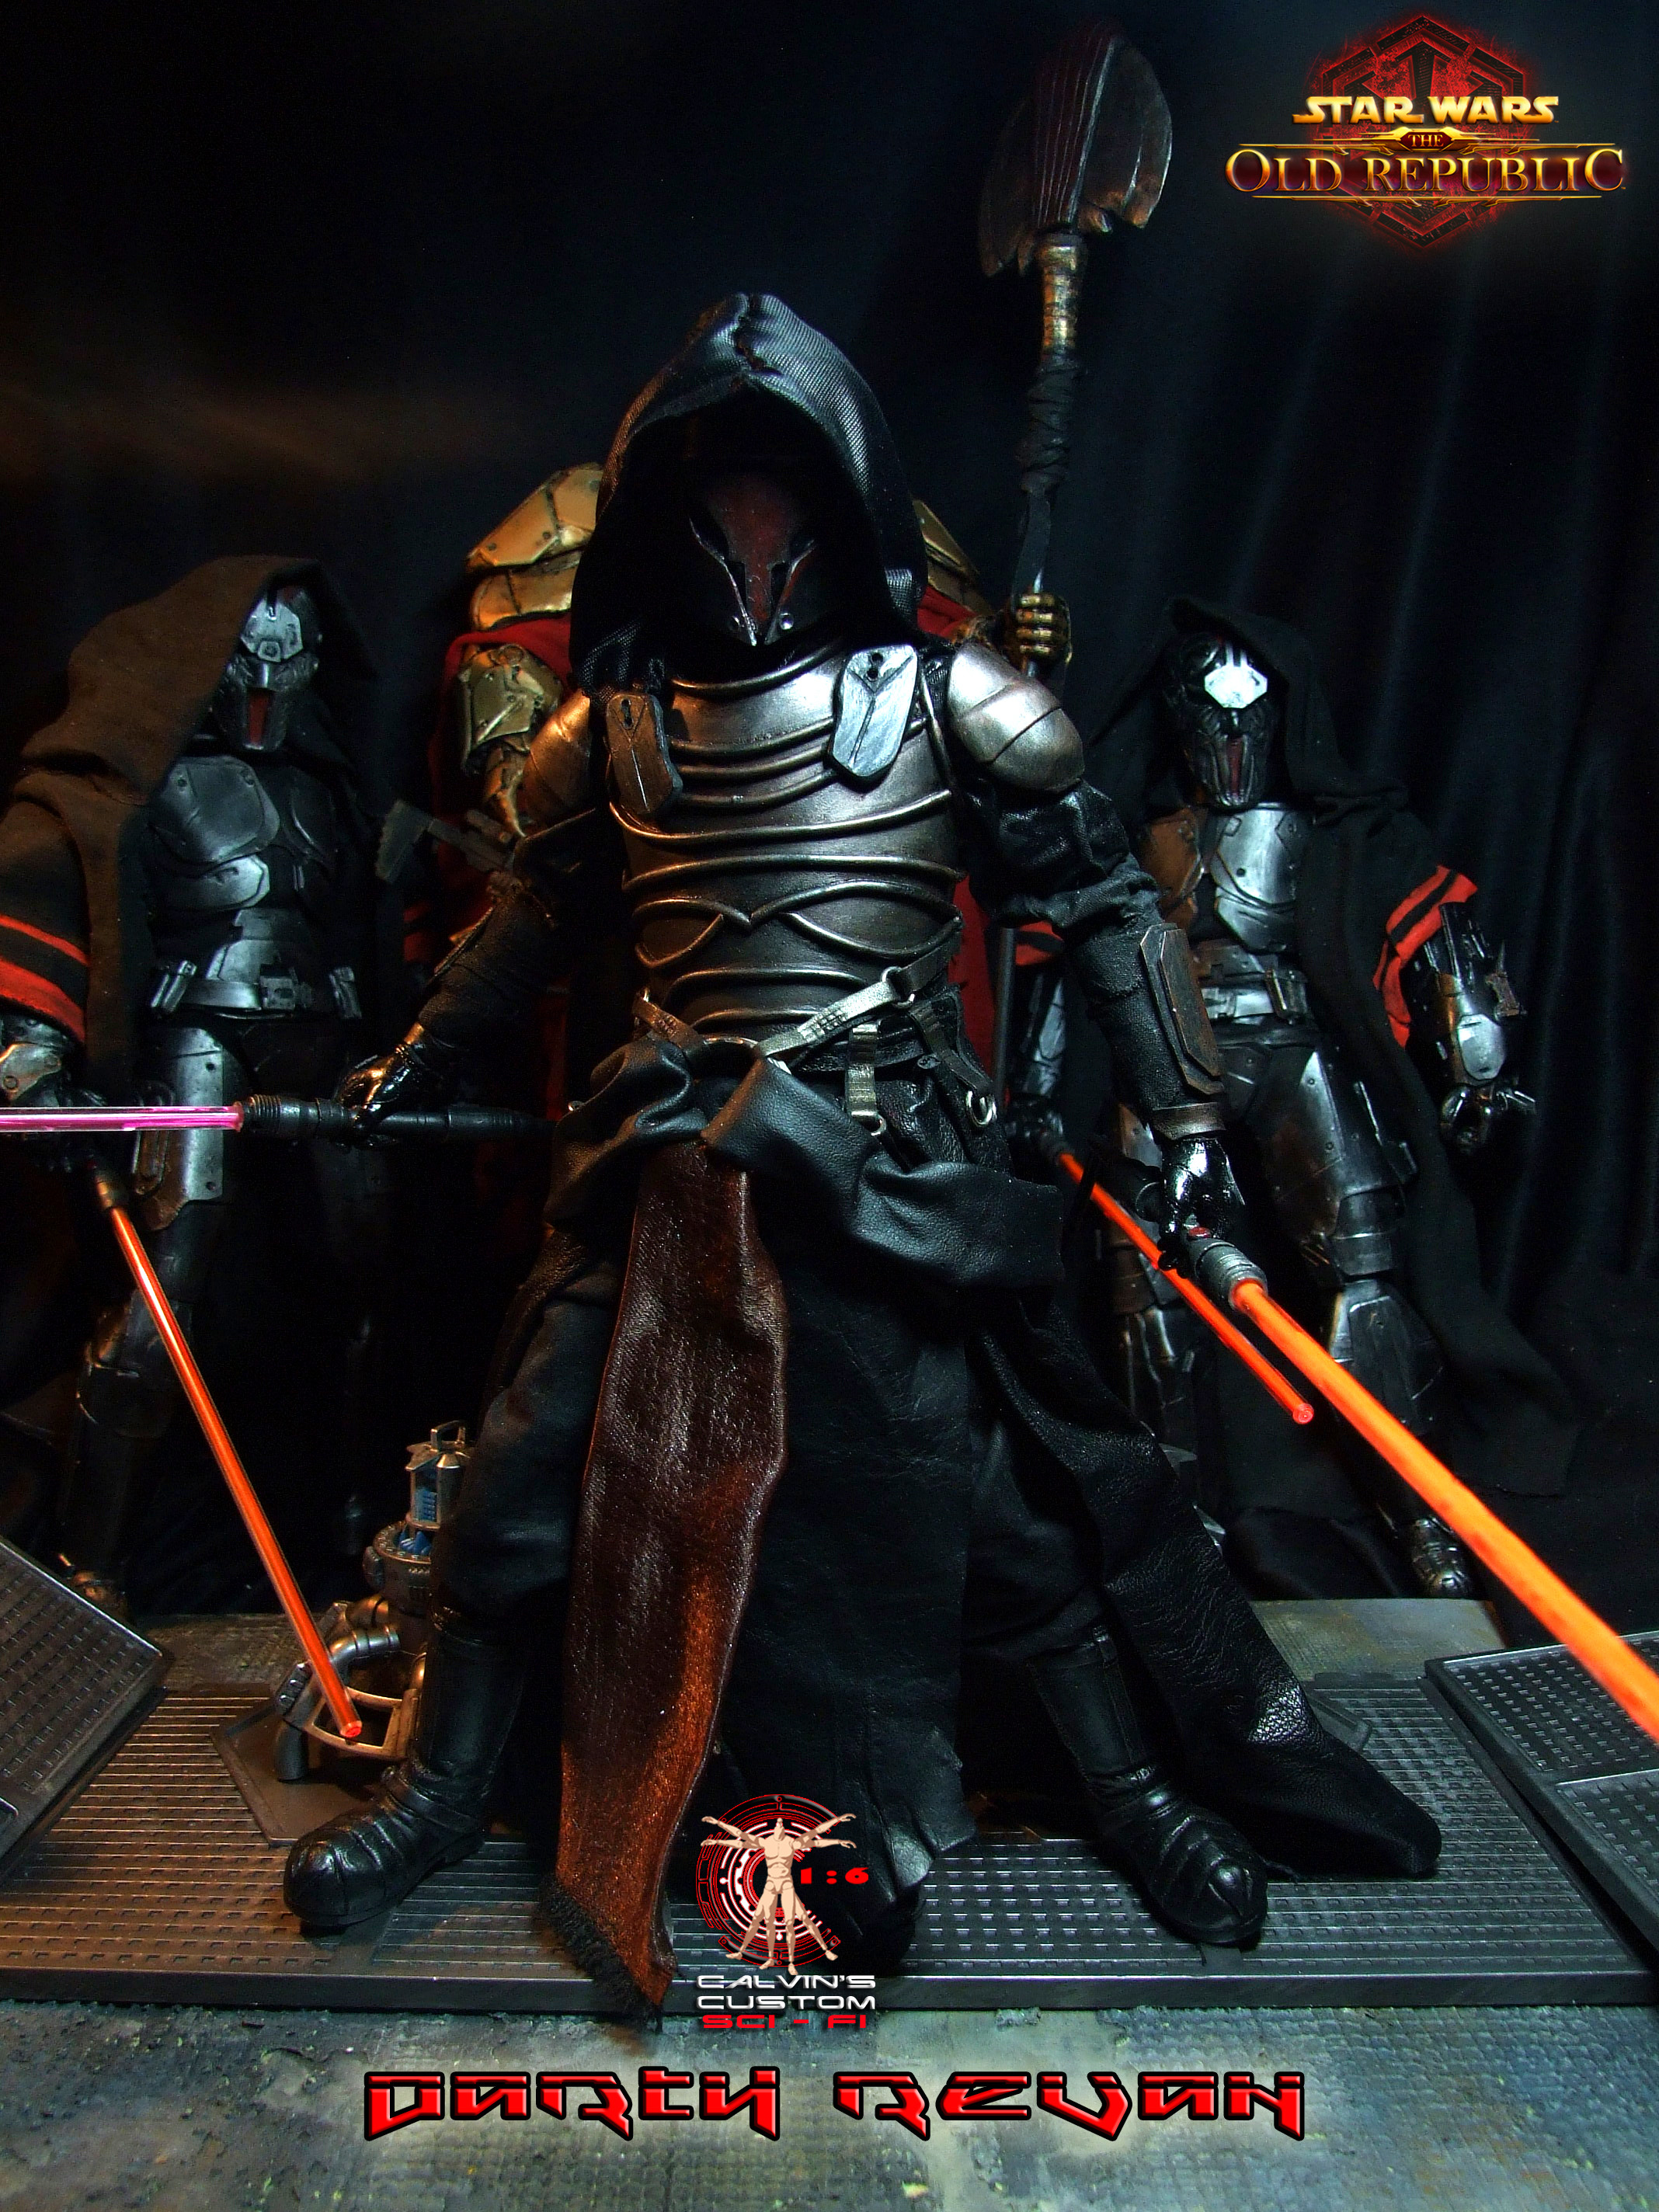 2136x2848 Star Wars images Calvin's Custom One Sixth Scale SWTOR Darth Revan figure  HD wallpaper and background photos